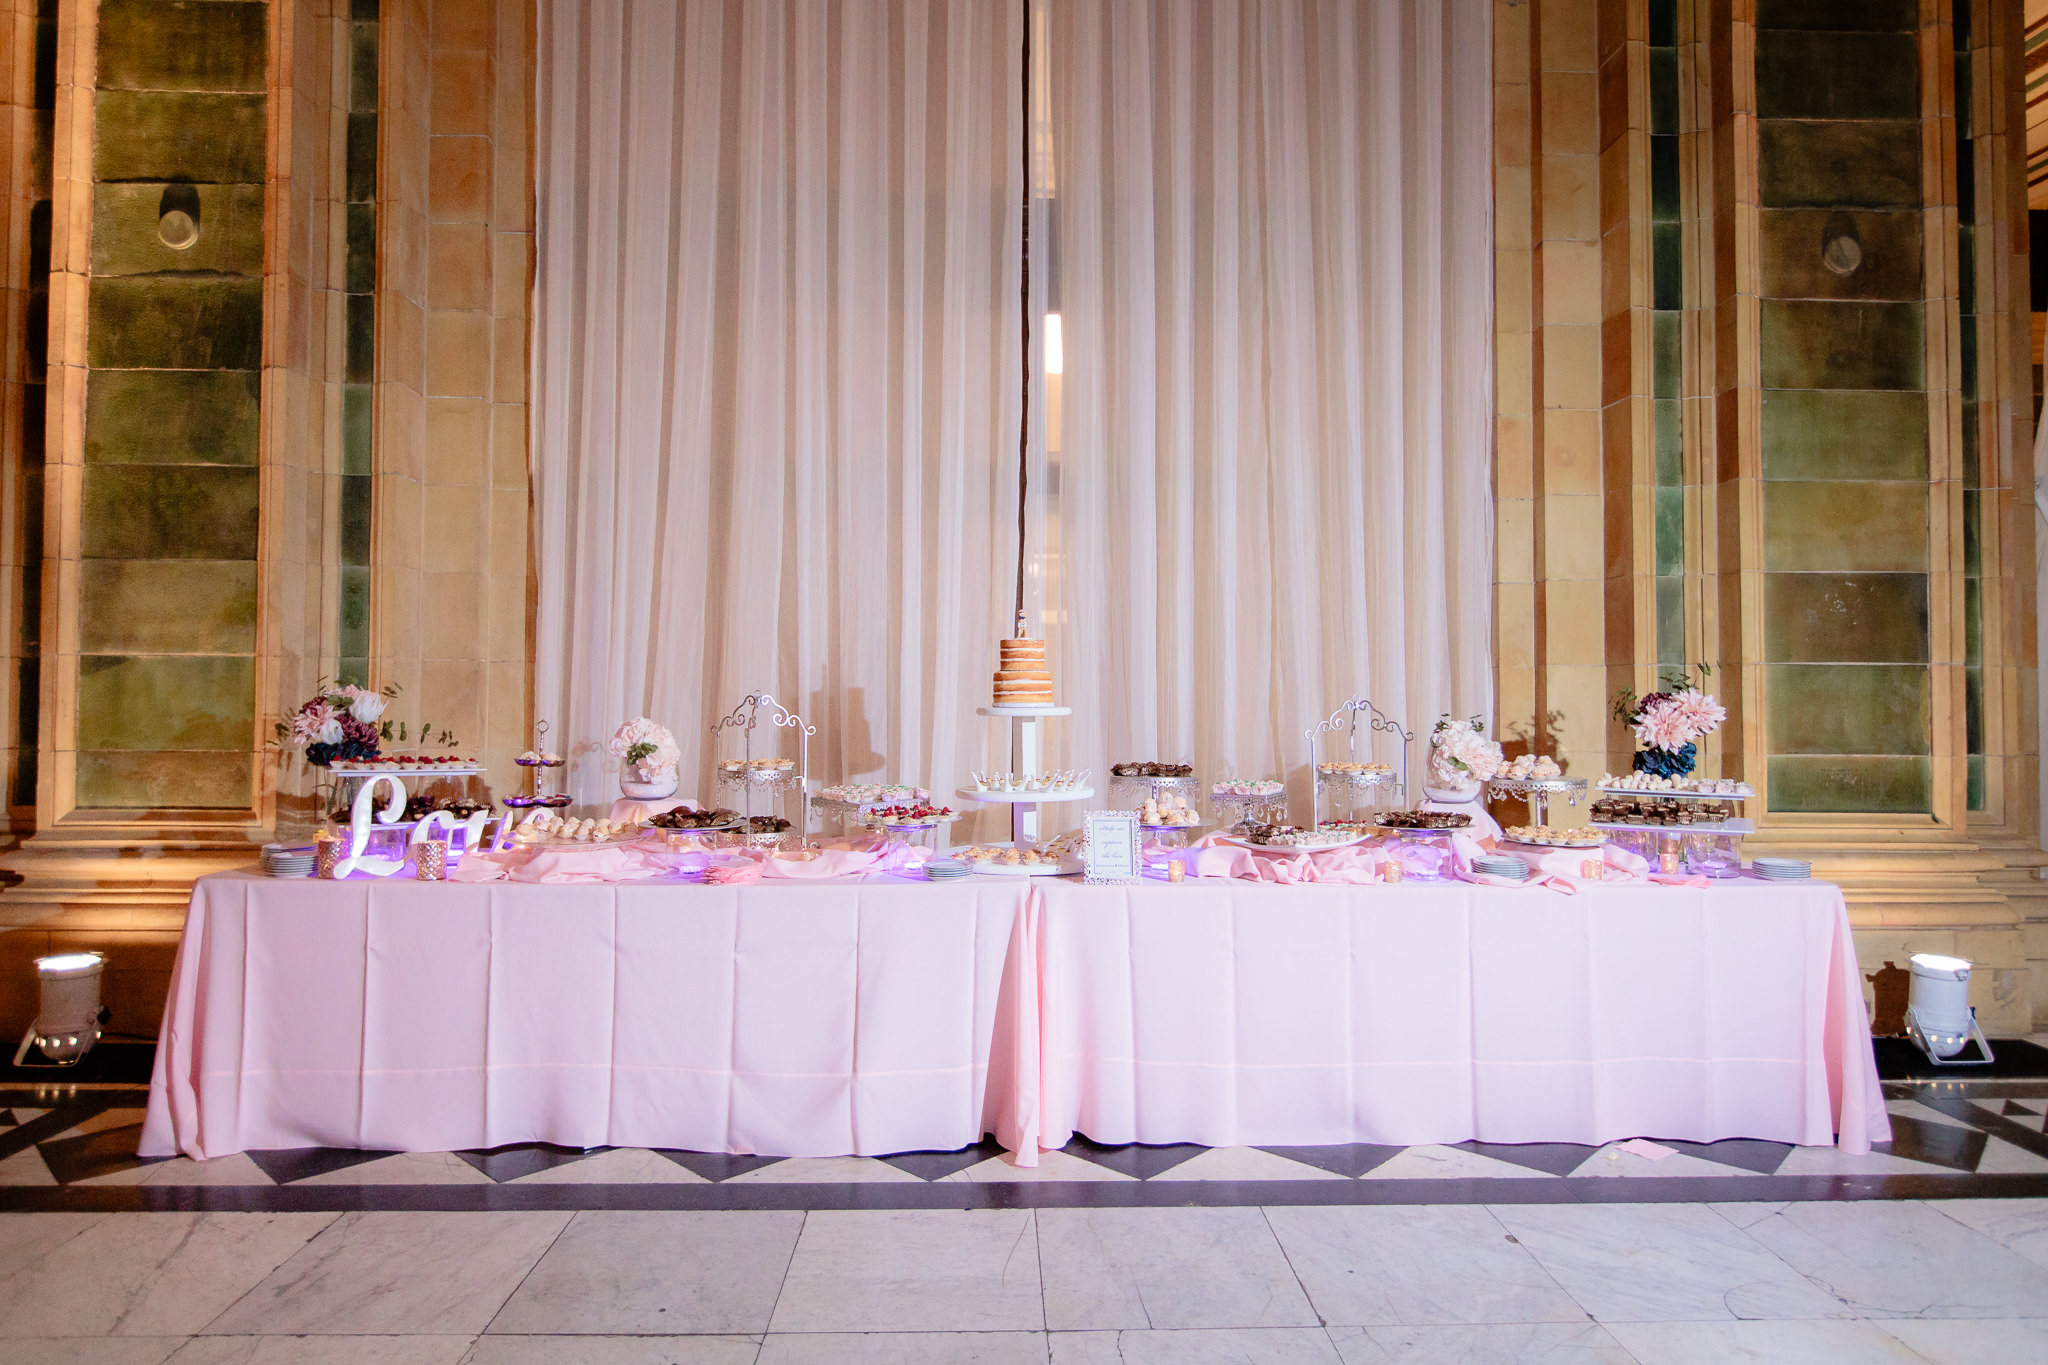 Full cookie table done by Rania's Catering for a reception at The Pennsylvanian